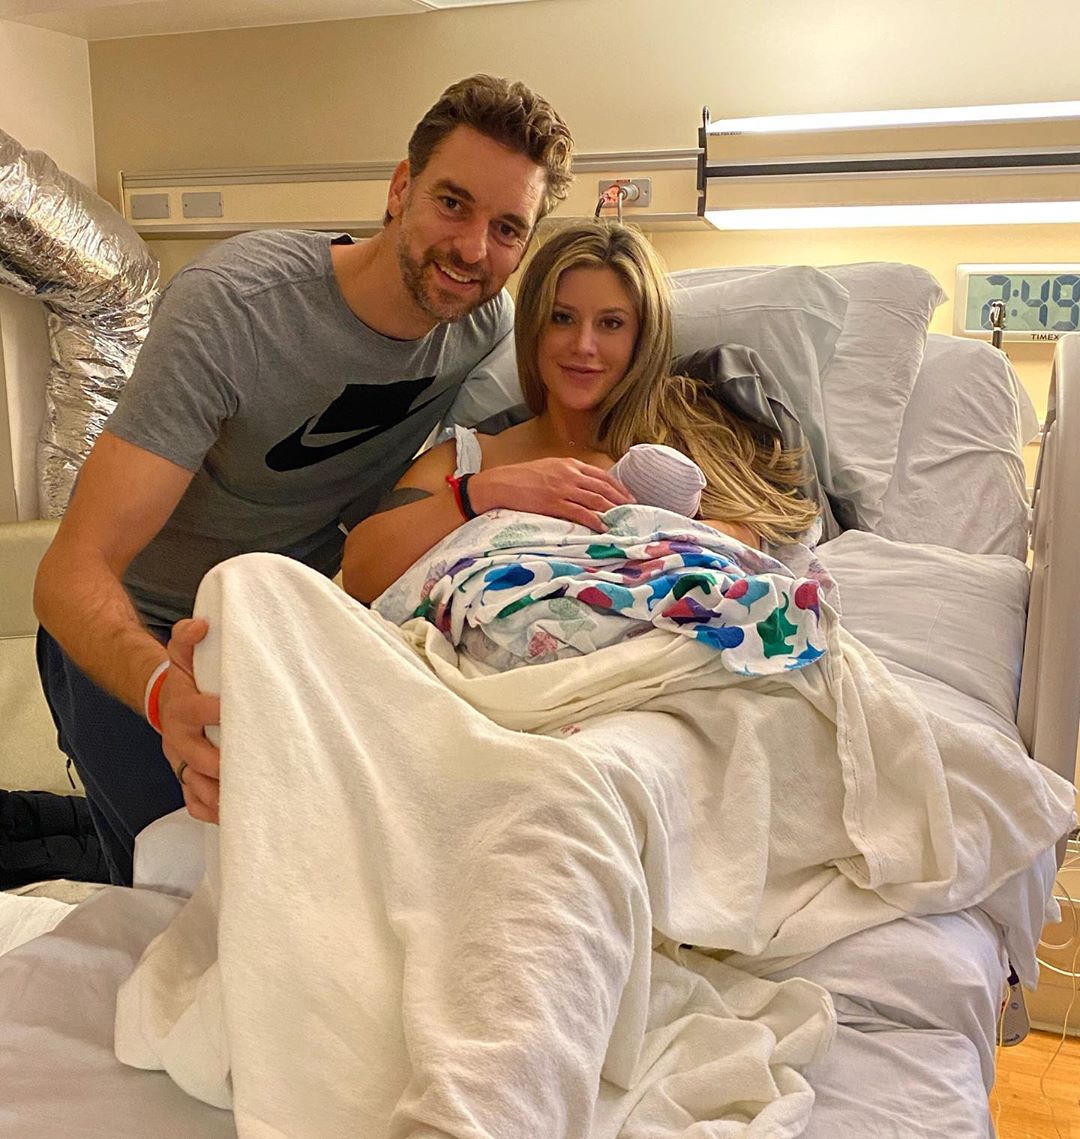 Lakers' Pau Gasol Names Baby After Kobe's Daughter Gianna, More Babies of 2020